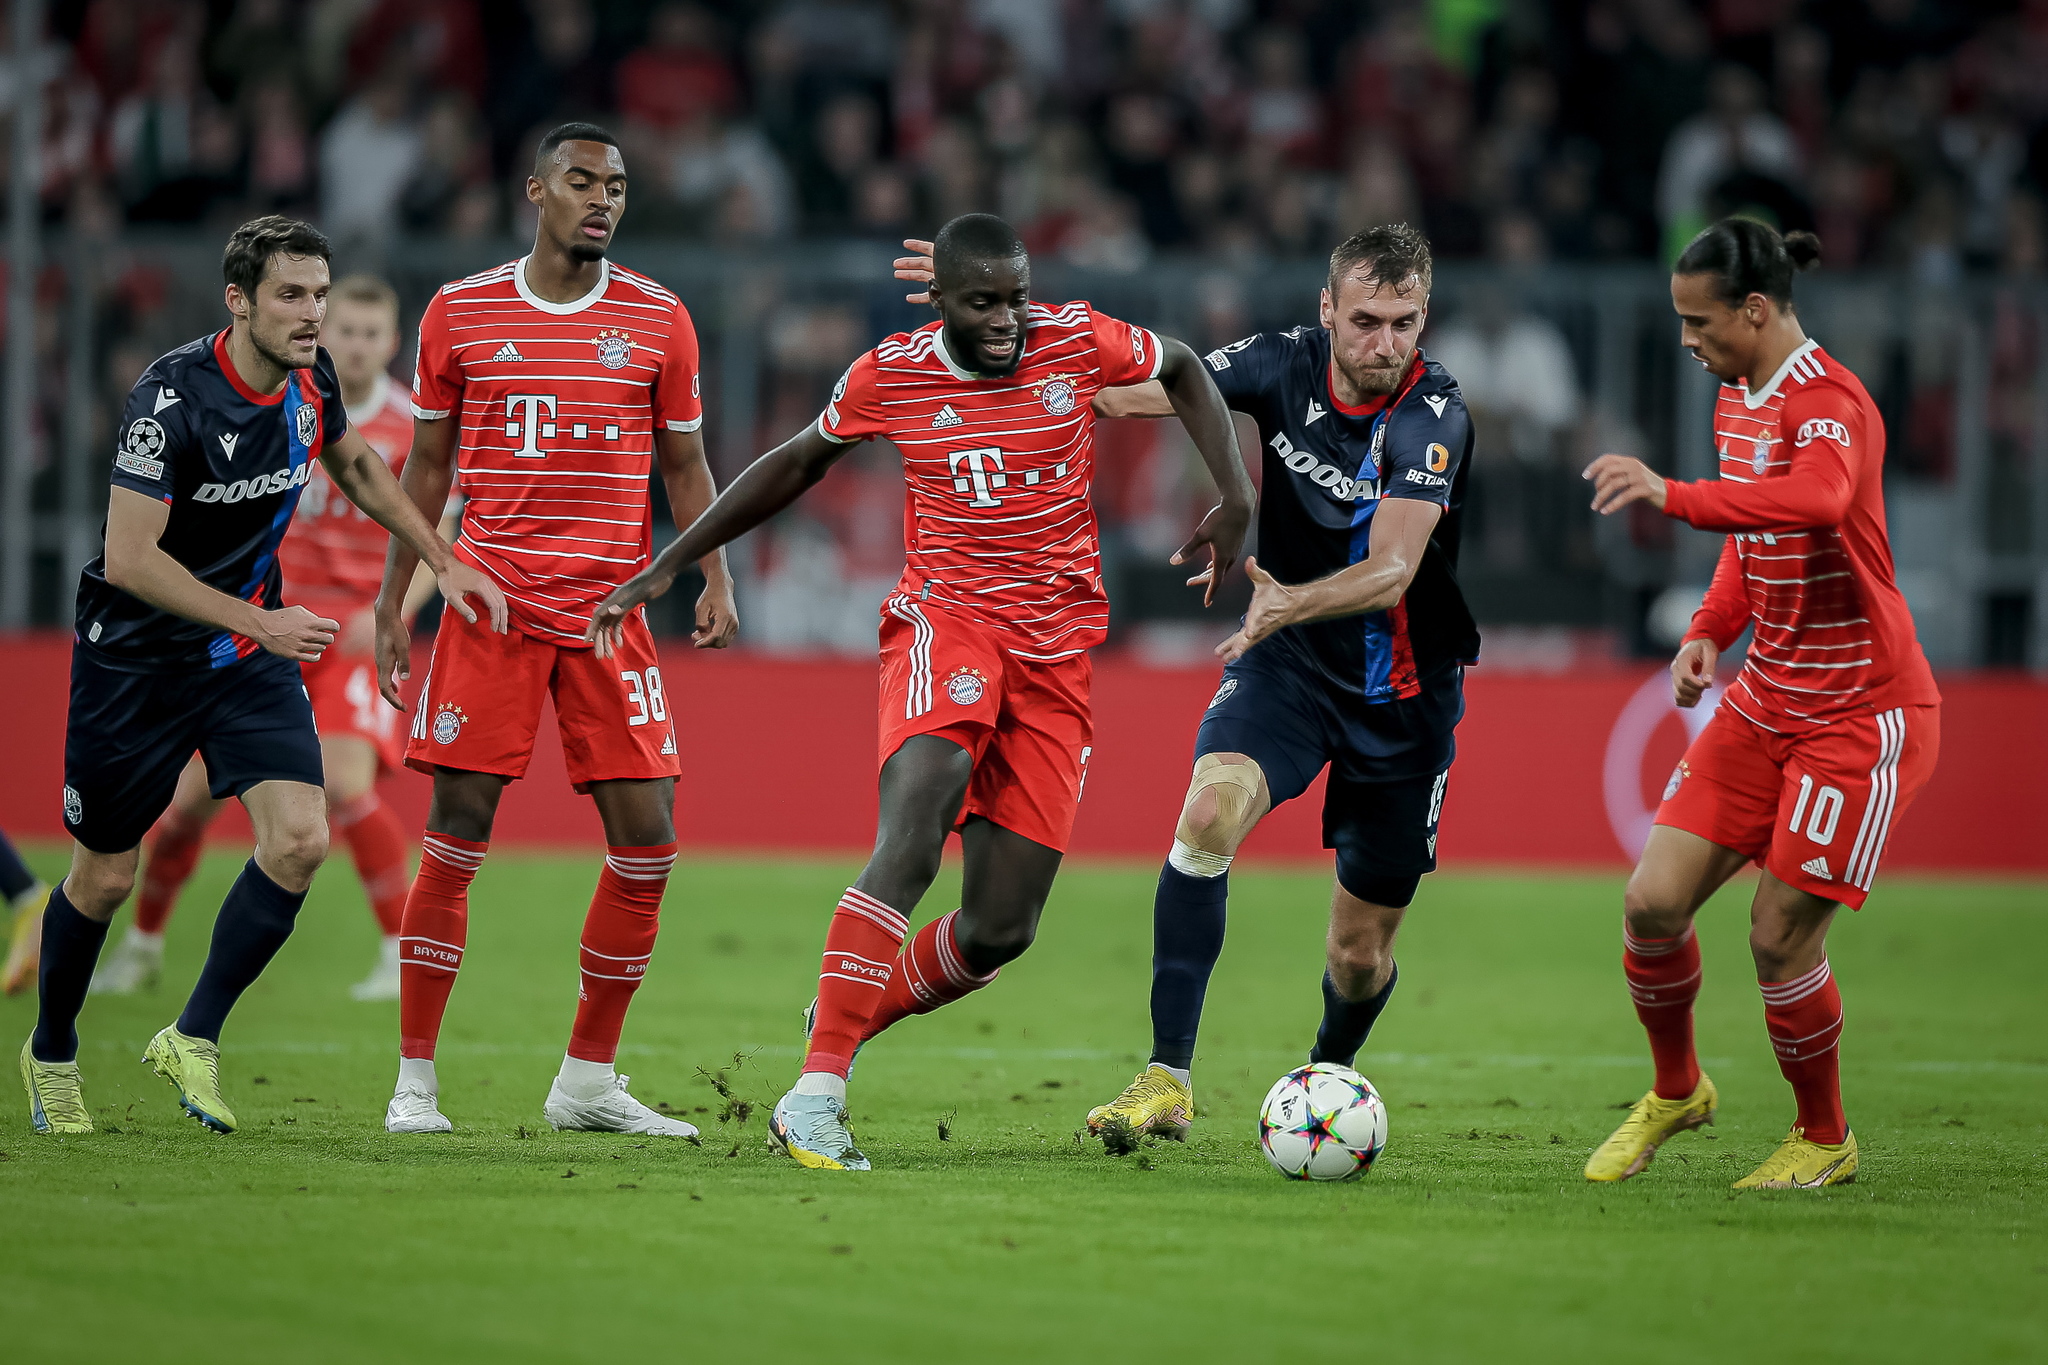 Munich (Germany), 04/10/2022.- Dayot Upamecano (C) of Munich in action during the UEFA Champions League group C soccer match between lt;HIT gt;Bayern lt;/HIT gt; Munich and FC Viktoria Plzen in Munich, Germany, 04 October 2022. (Liga de Campeones, Alemania) EFE/EPA/LEONHARD SIMON